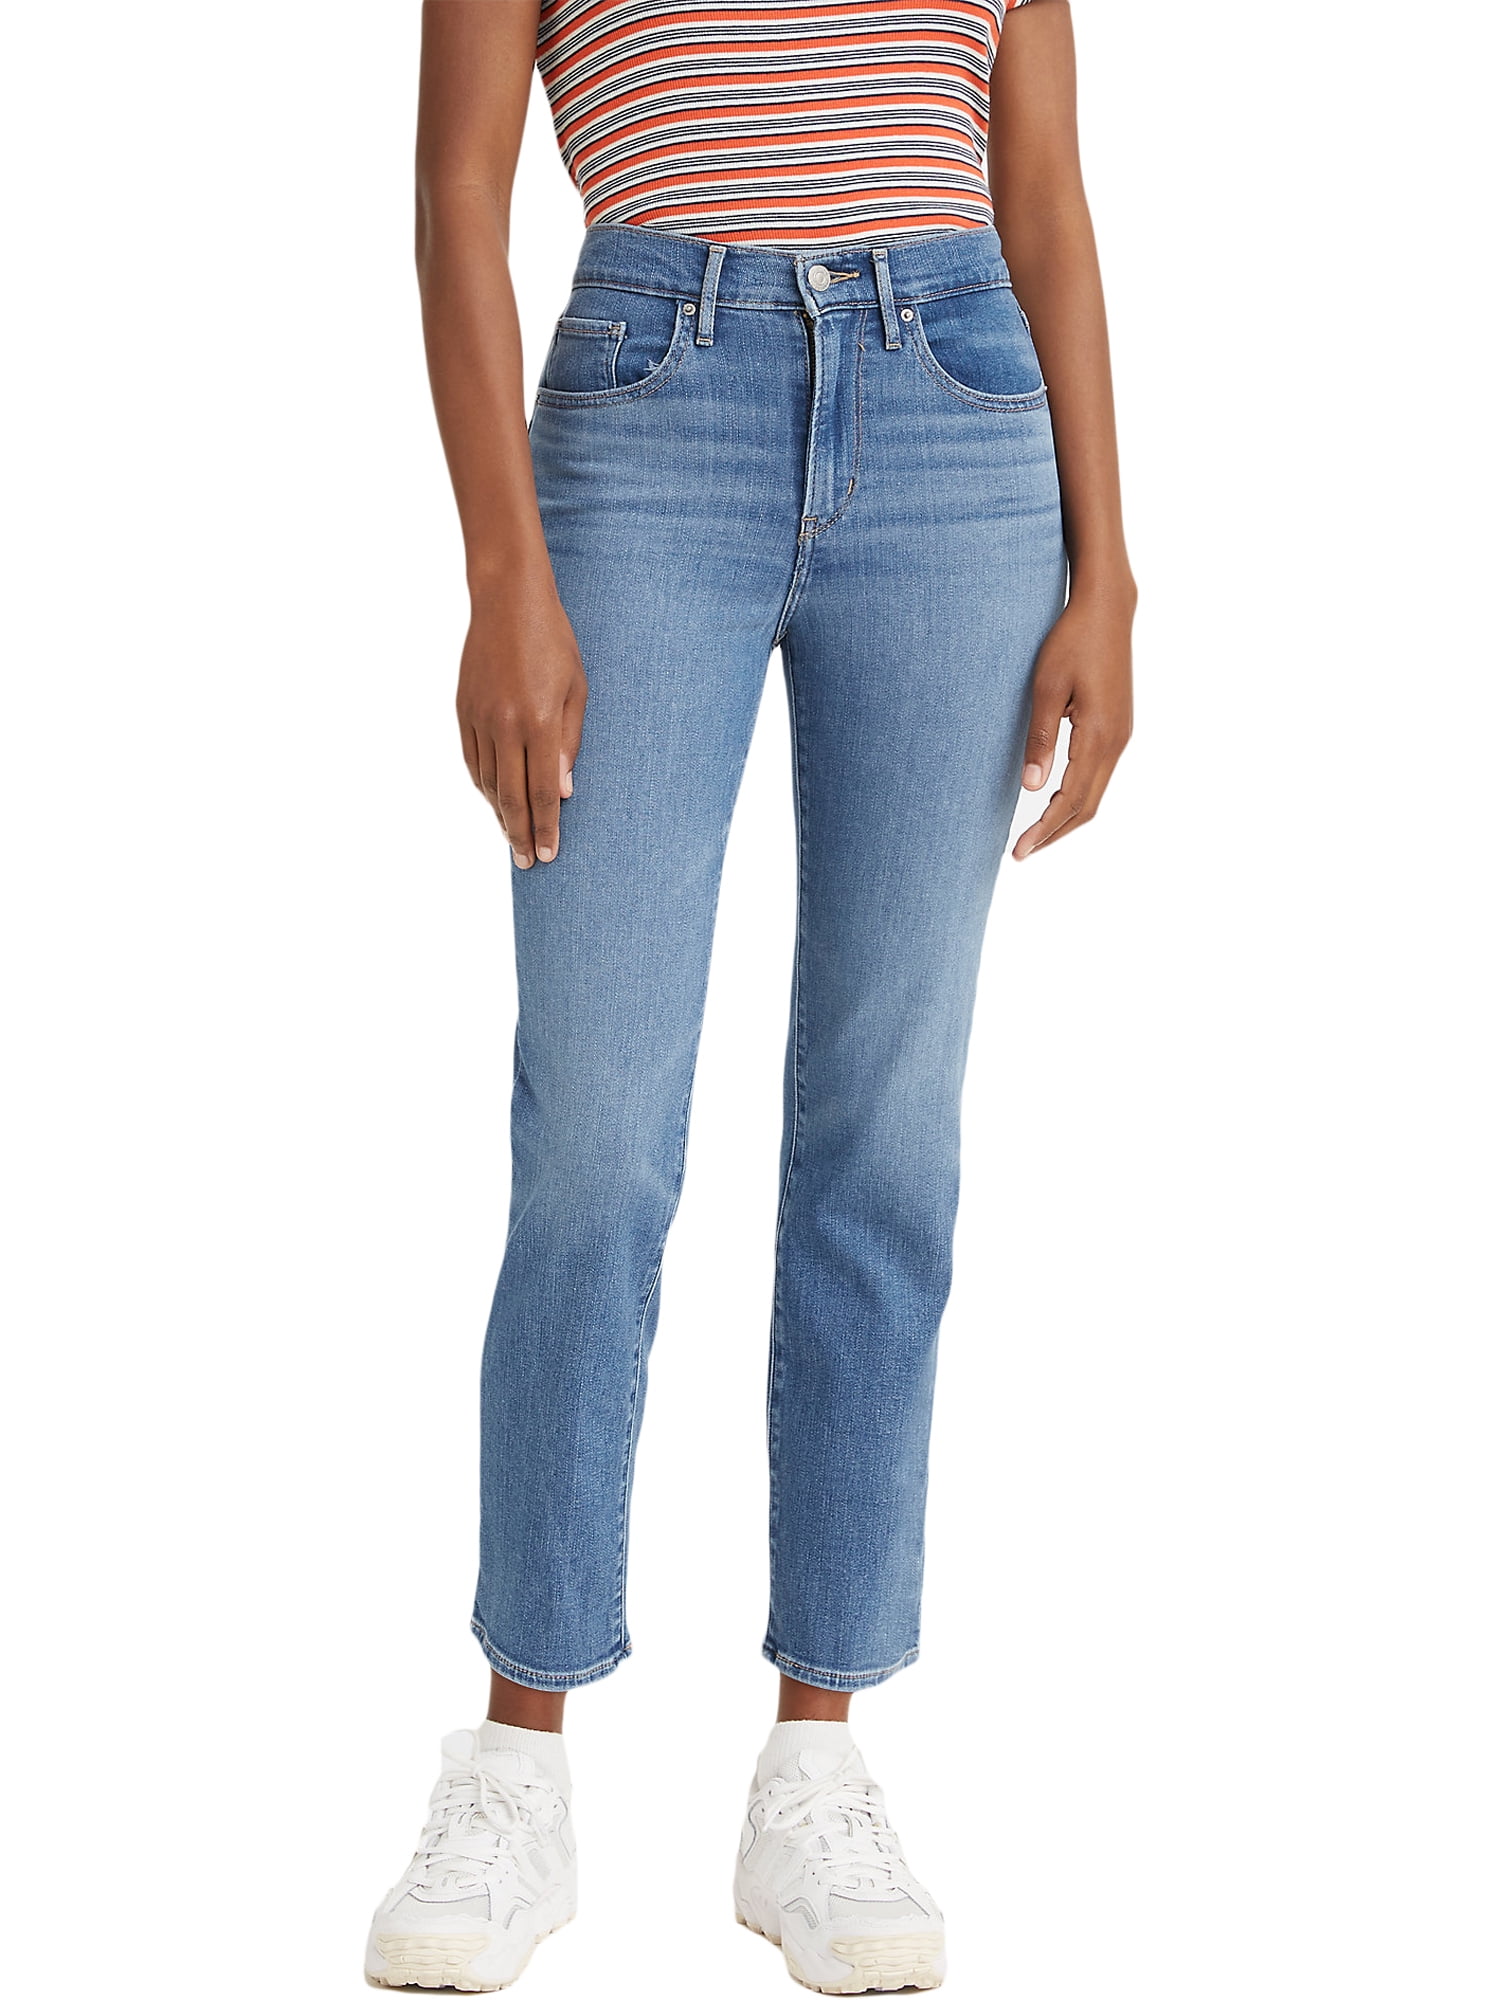 Levi's Original Women's 724 High-Rise Straight Cropped Jeans 